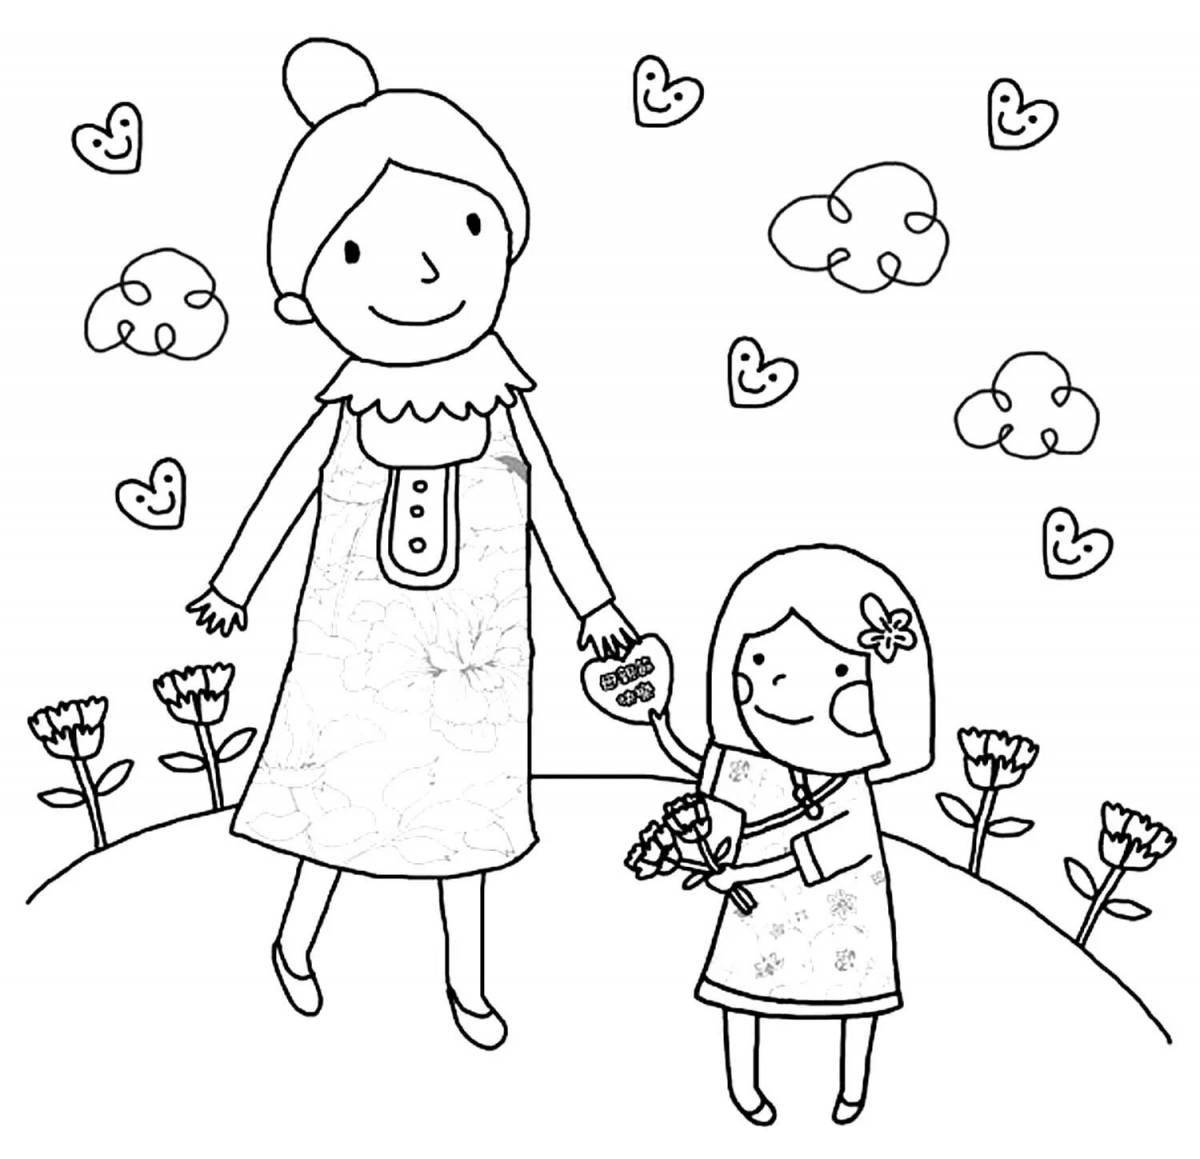 Caring mommy coloring page